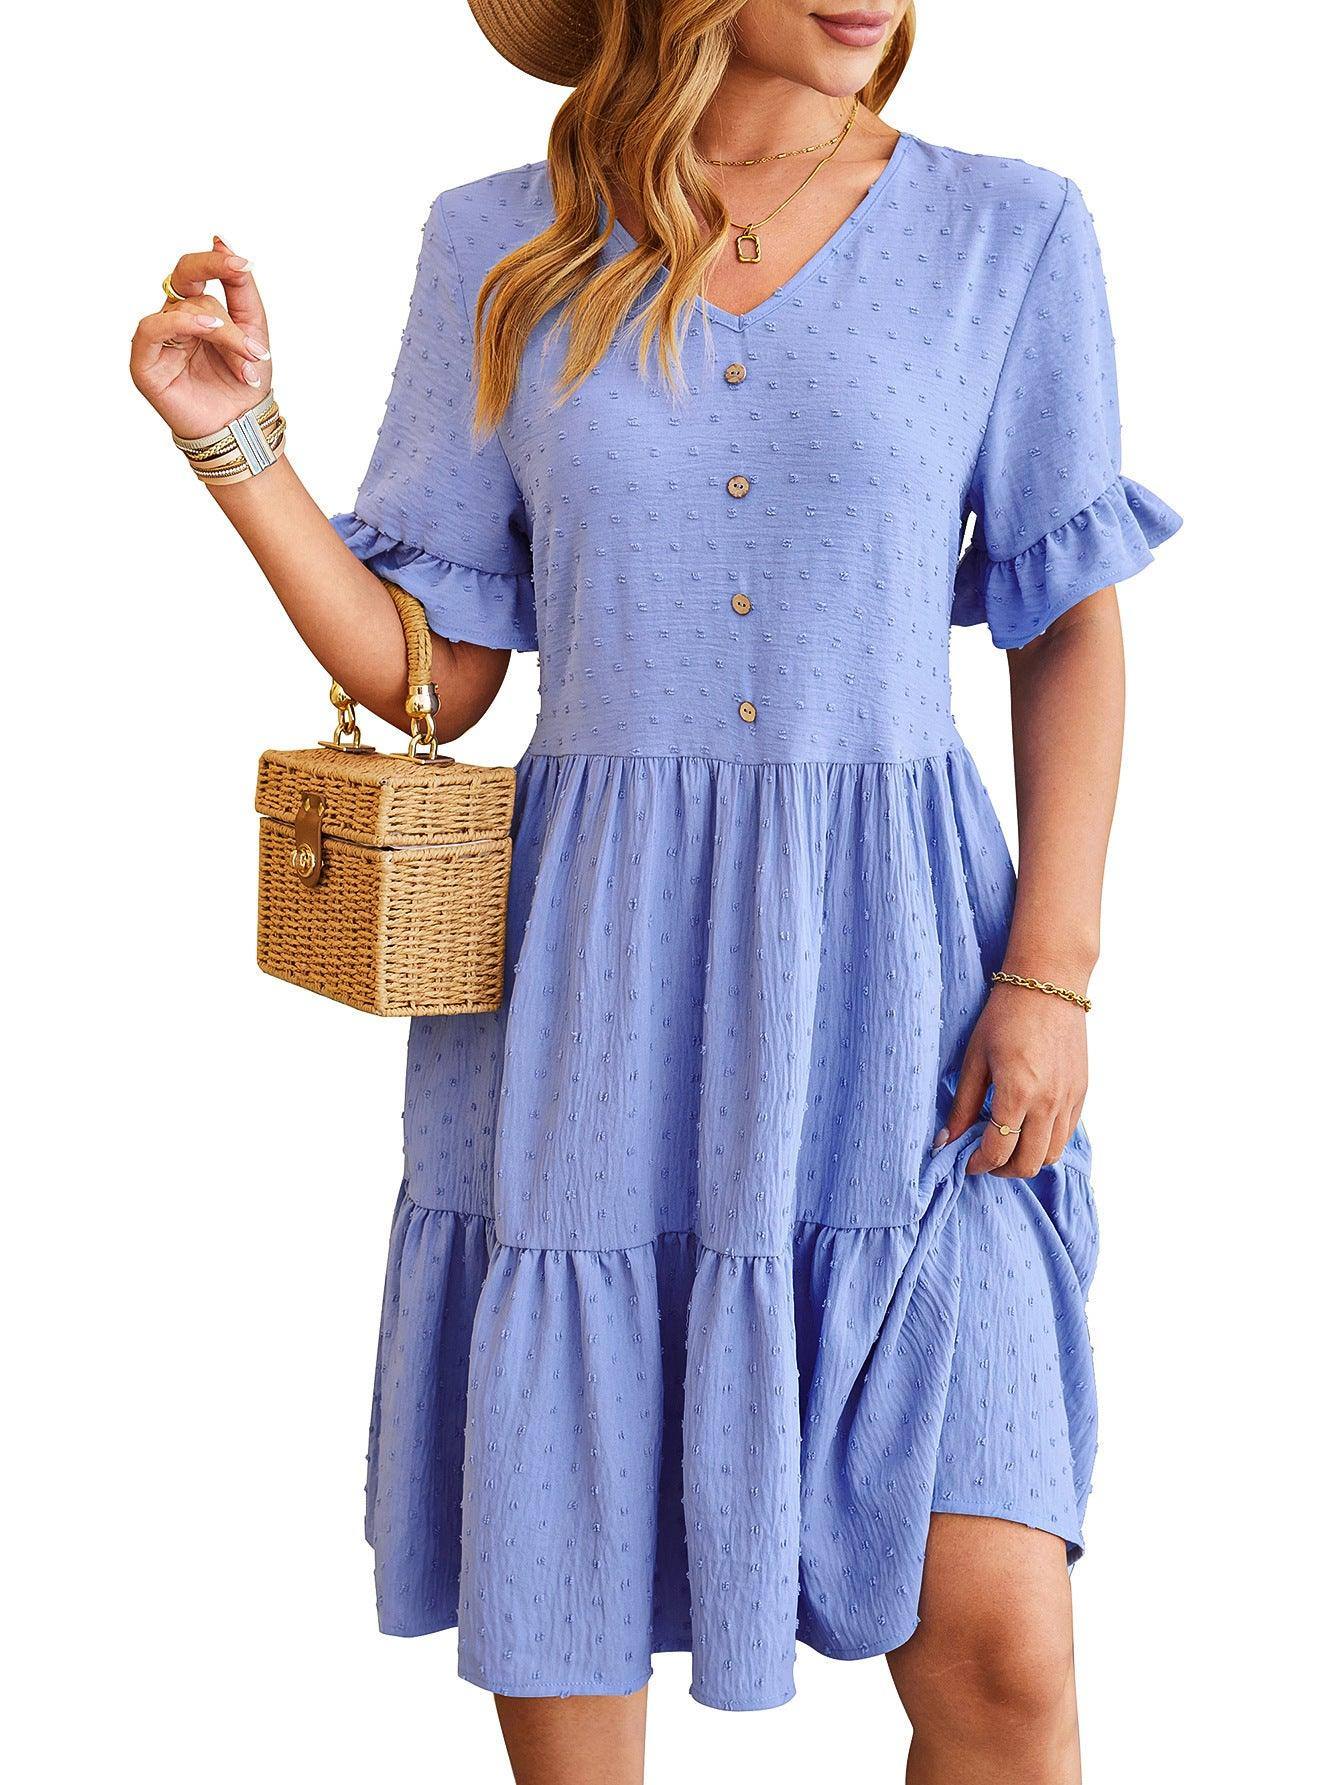 New V-neck Ruffle Short-sleeved Dress Summer Casual Fashion Button Jacquard Design Pleated Dresses Solid Color Womens Clothing